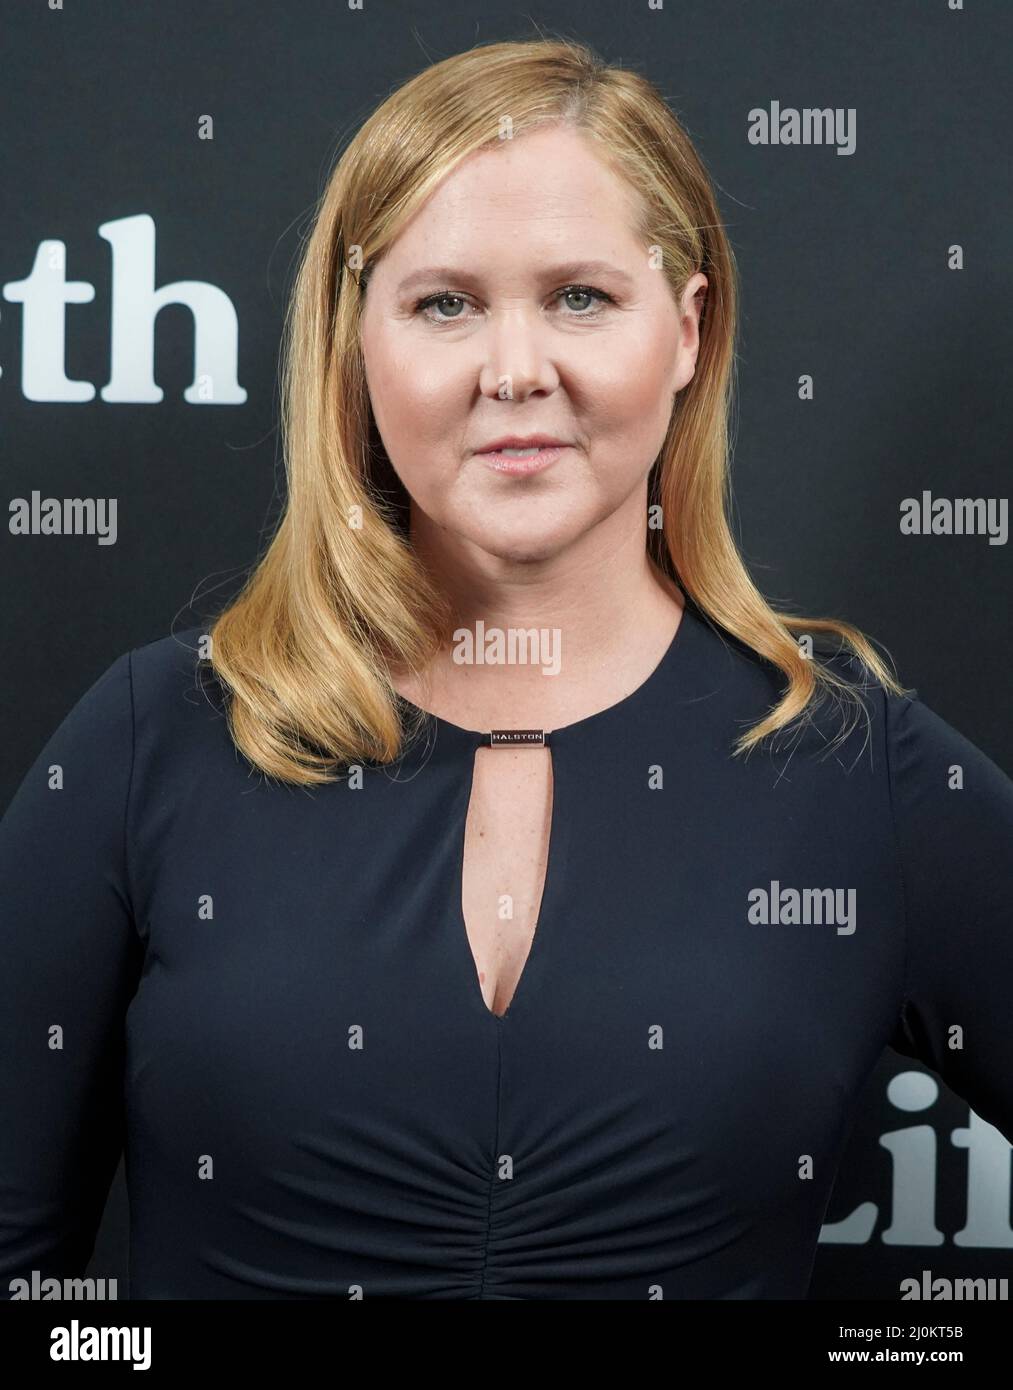 New York, NY - March 16, 2022: Amy Schumer attends Hulu's 'Life & Beth' New York Premiere at SVA Theater Stock Photo